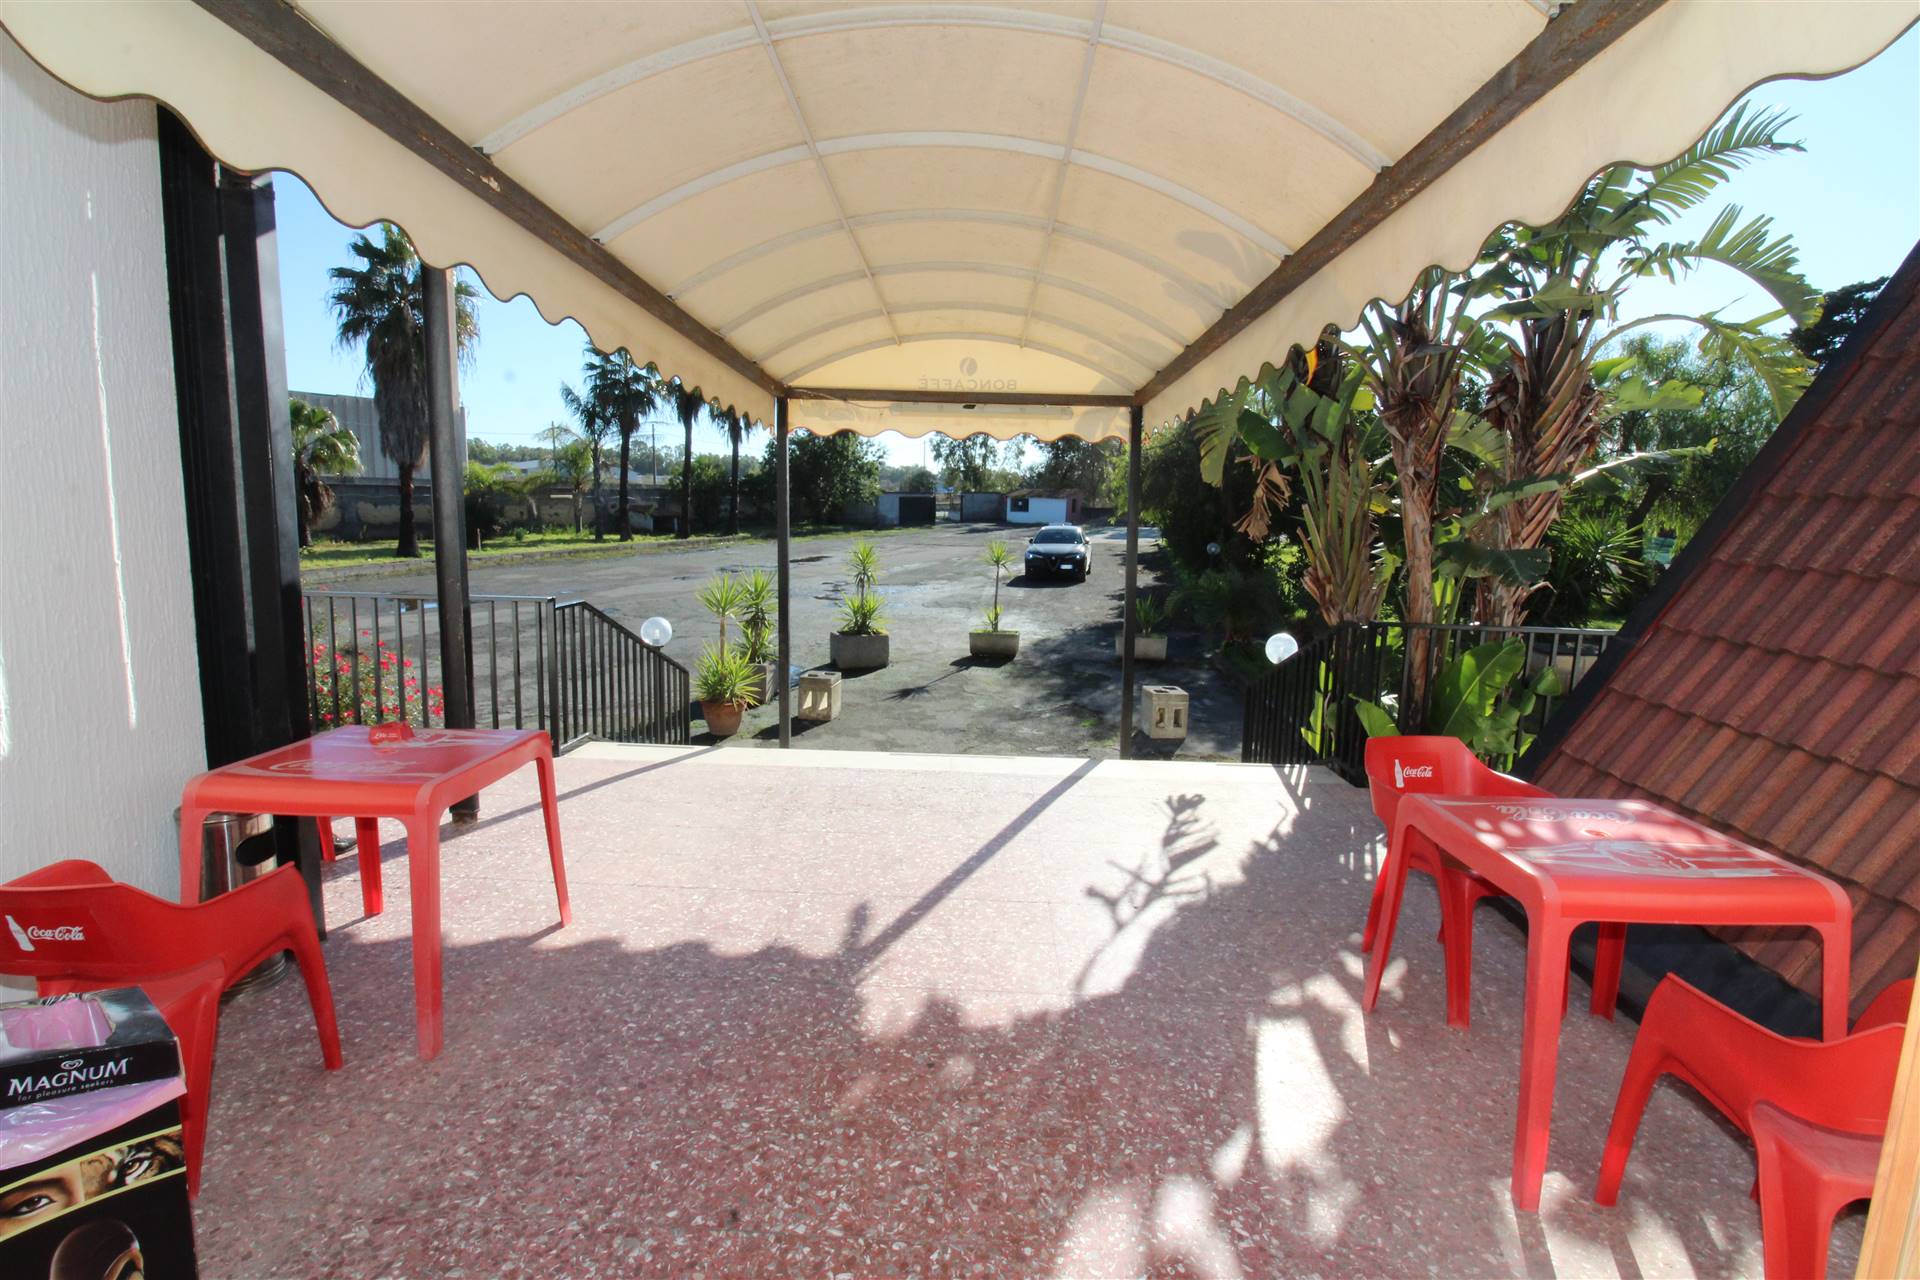 C/DA VACCARIZZO, CATANIA, Restaurant for sale, Good condition, Energetic class: G, placed at Ground, composed by: , Reserved